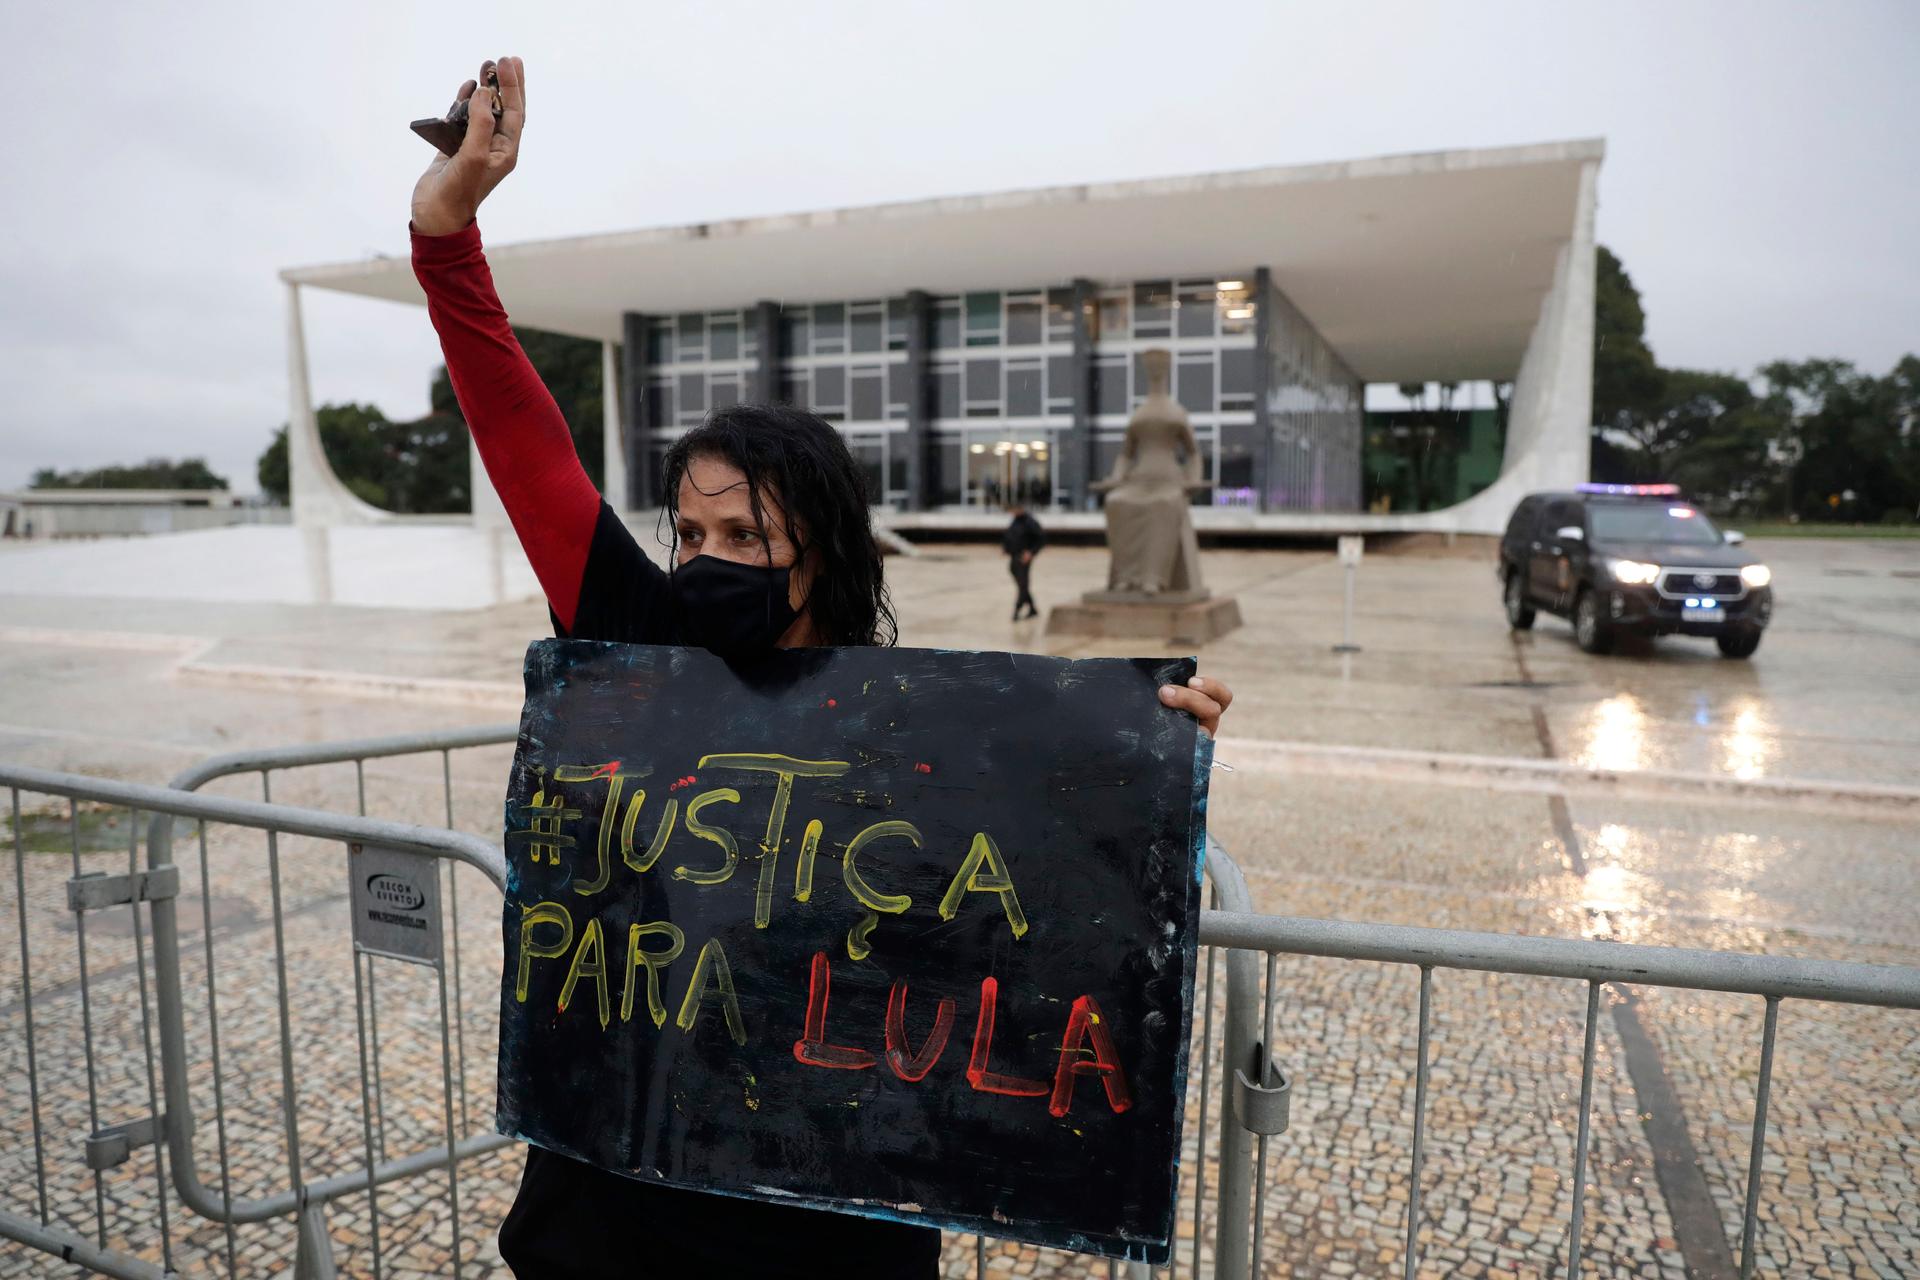 A demonstrator wearing a mask against the spread of the new coronavirus holds a sign that reads in Portuguese "Justice for Lula," in reference to former Brazilian President Luiz Inácio Lula da Silva, during a protest commemorating the Supreme Court's deci